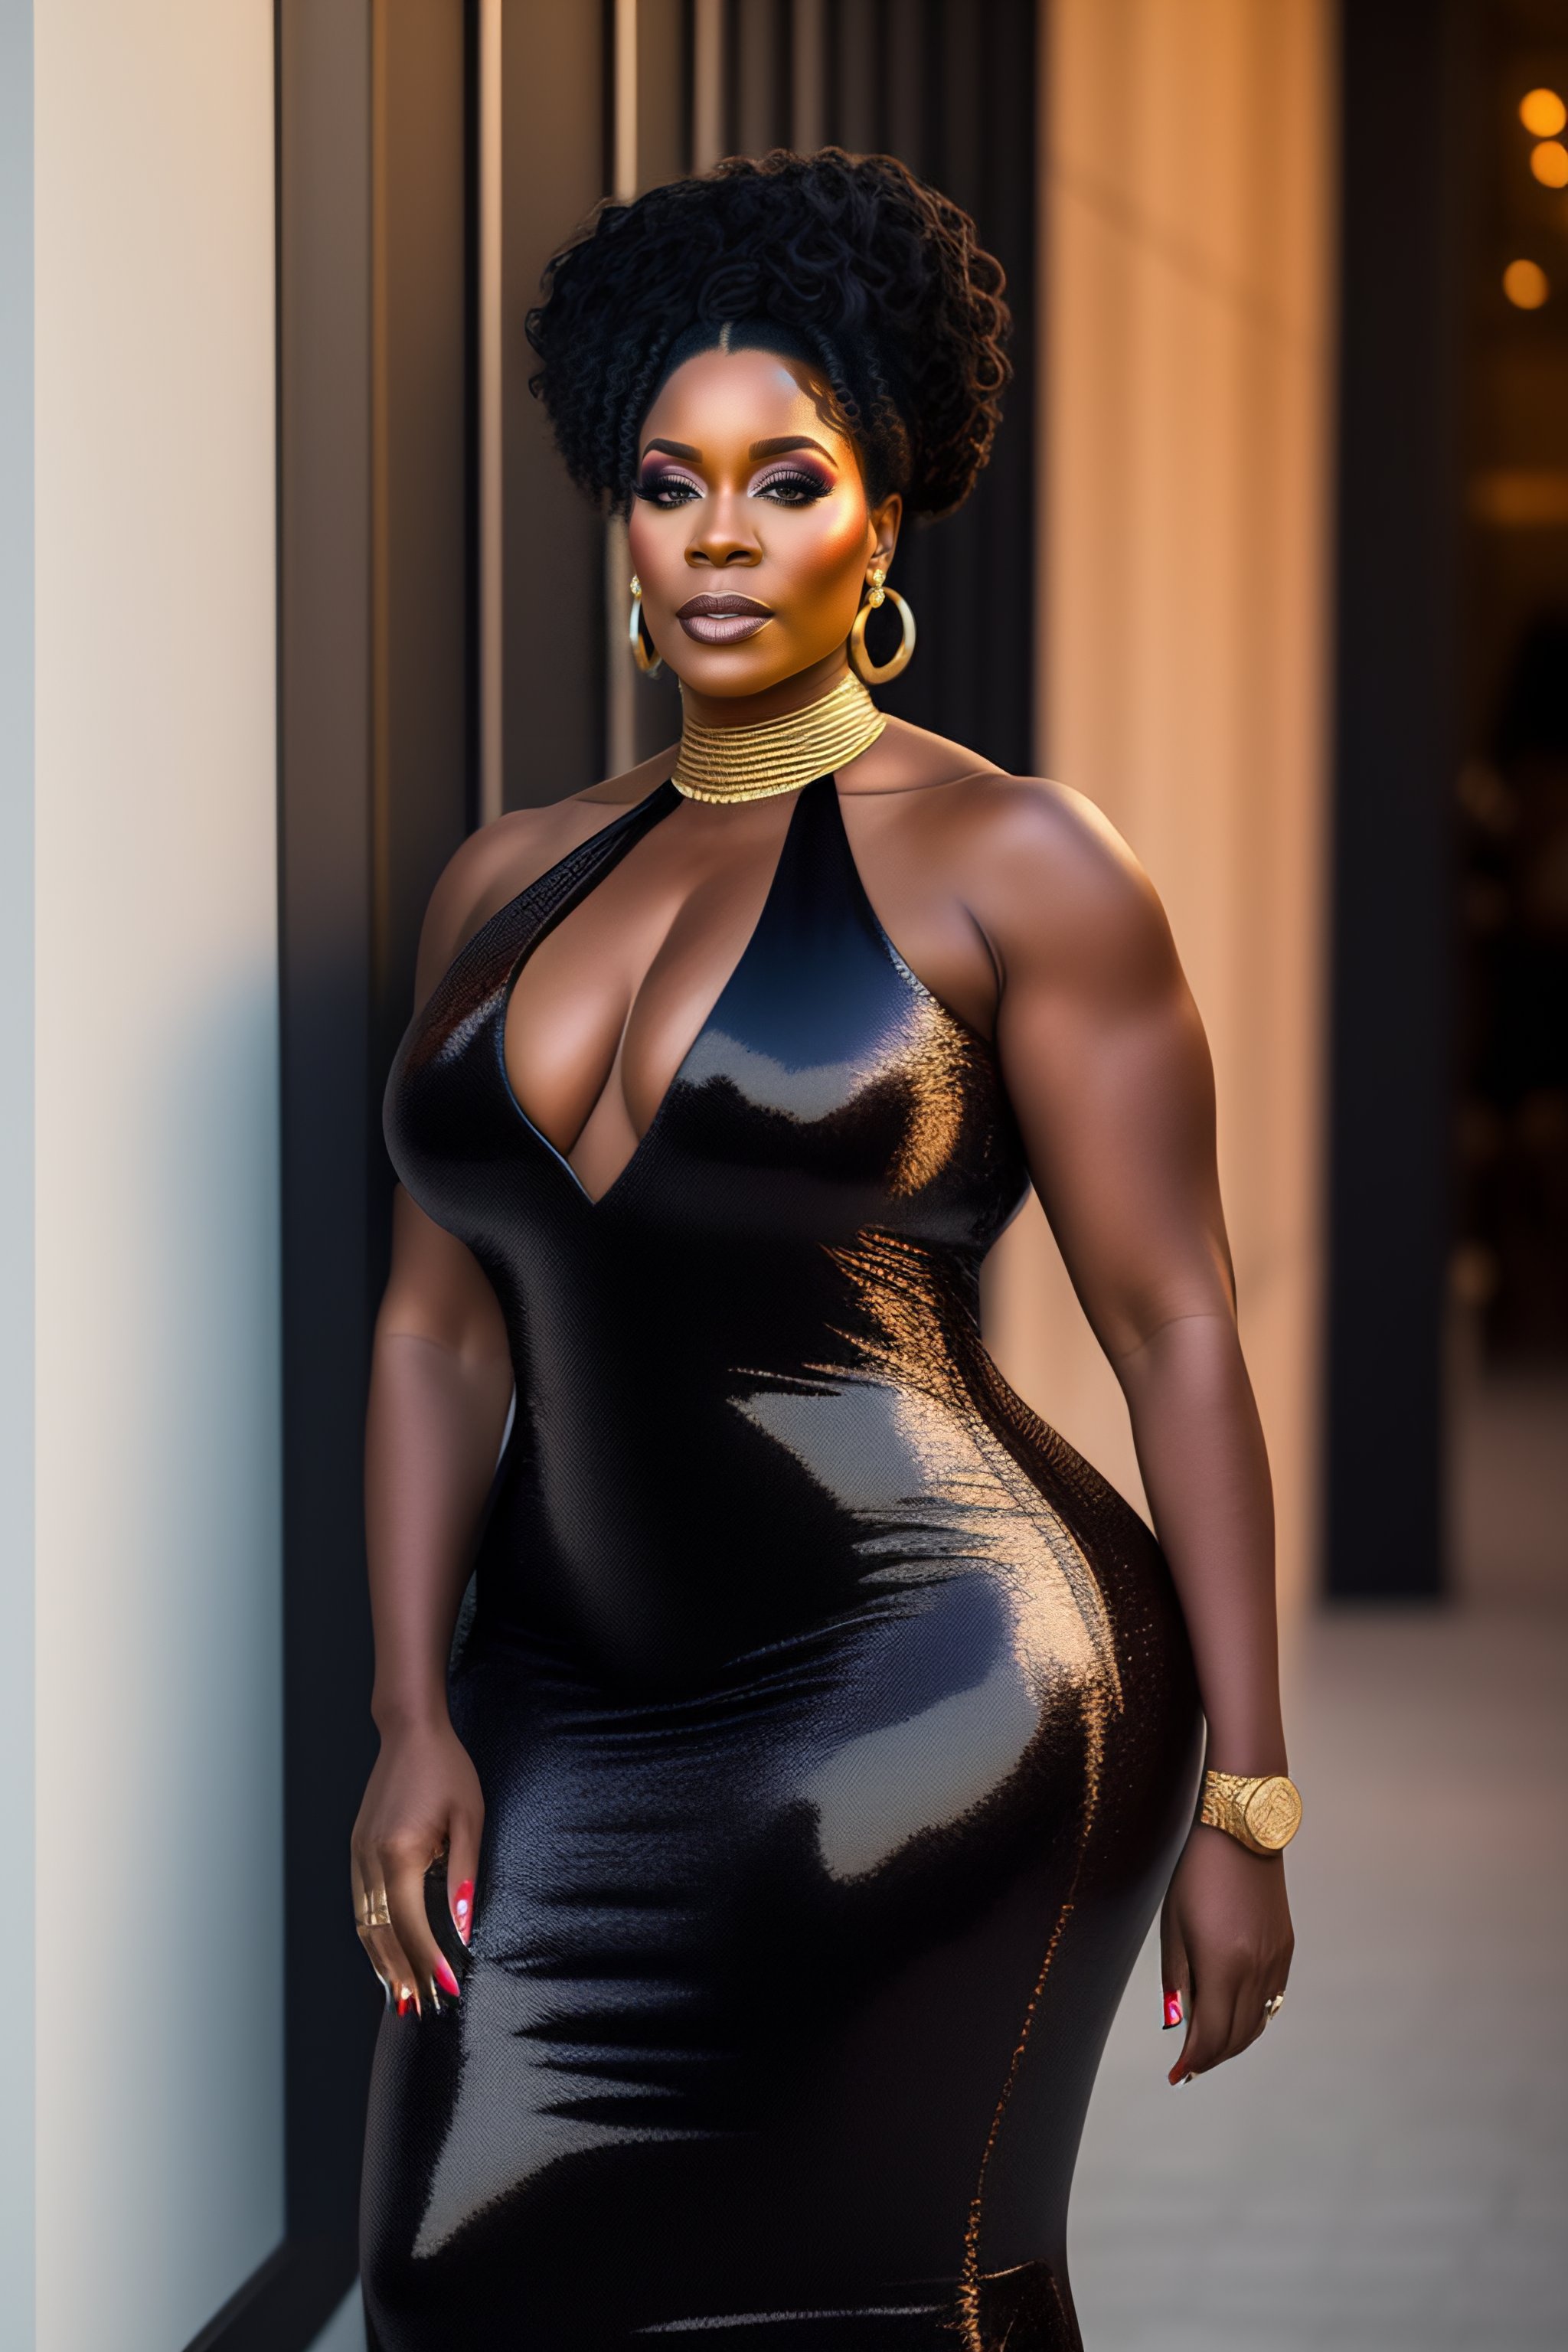 Lexica - Full body studio picture of a 50 year old average size black woman  in low cut dress